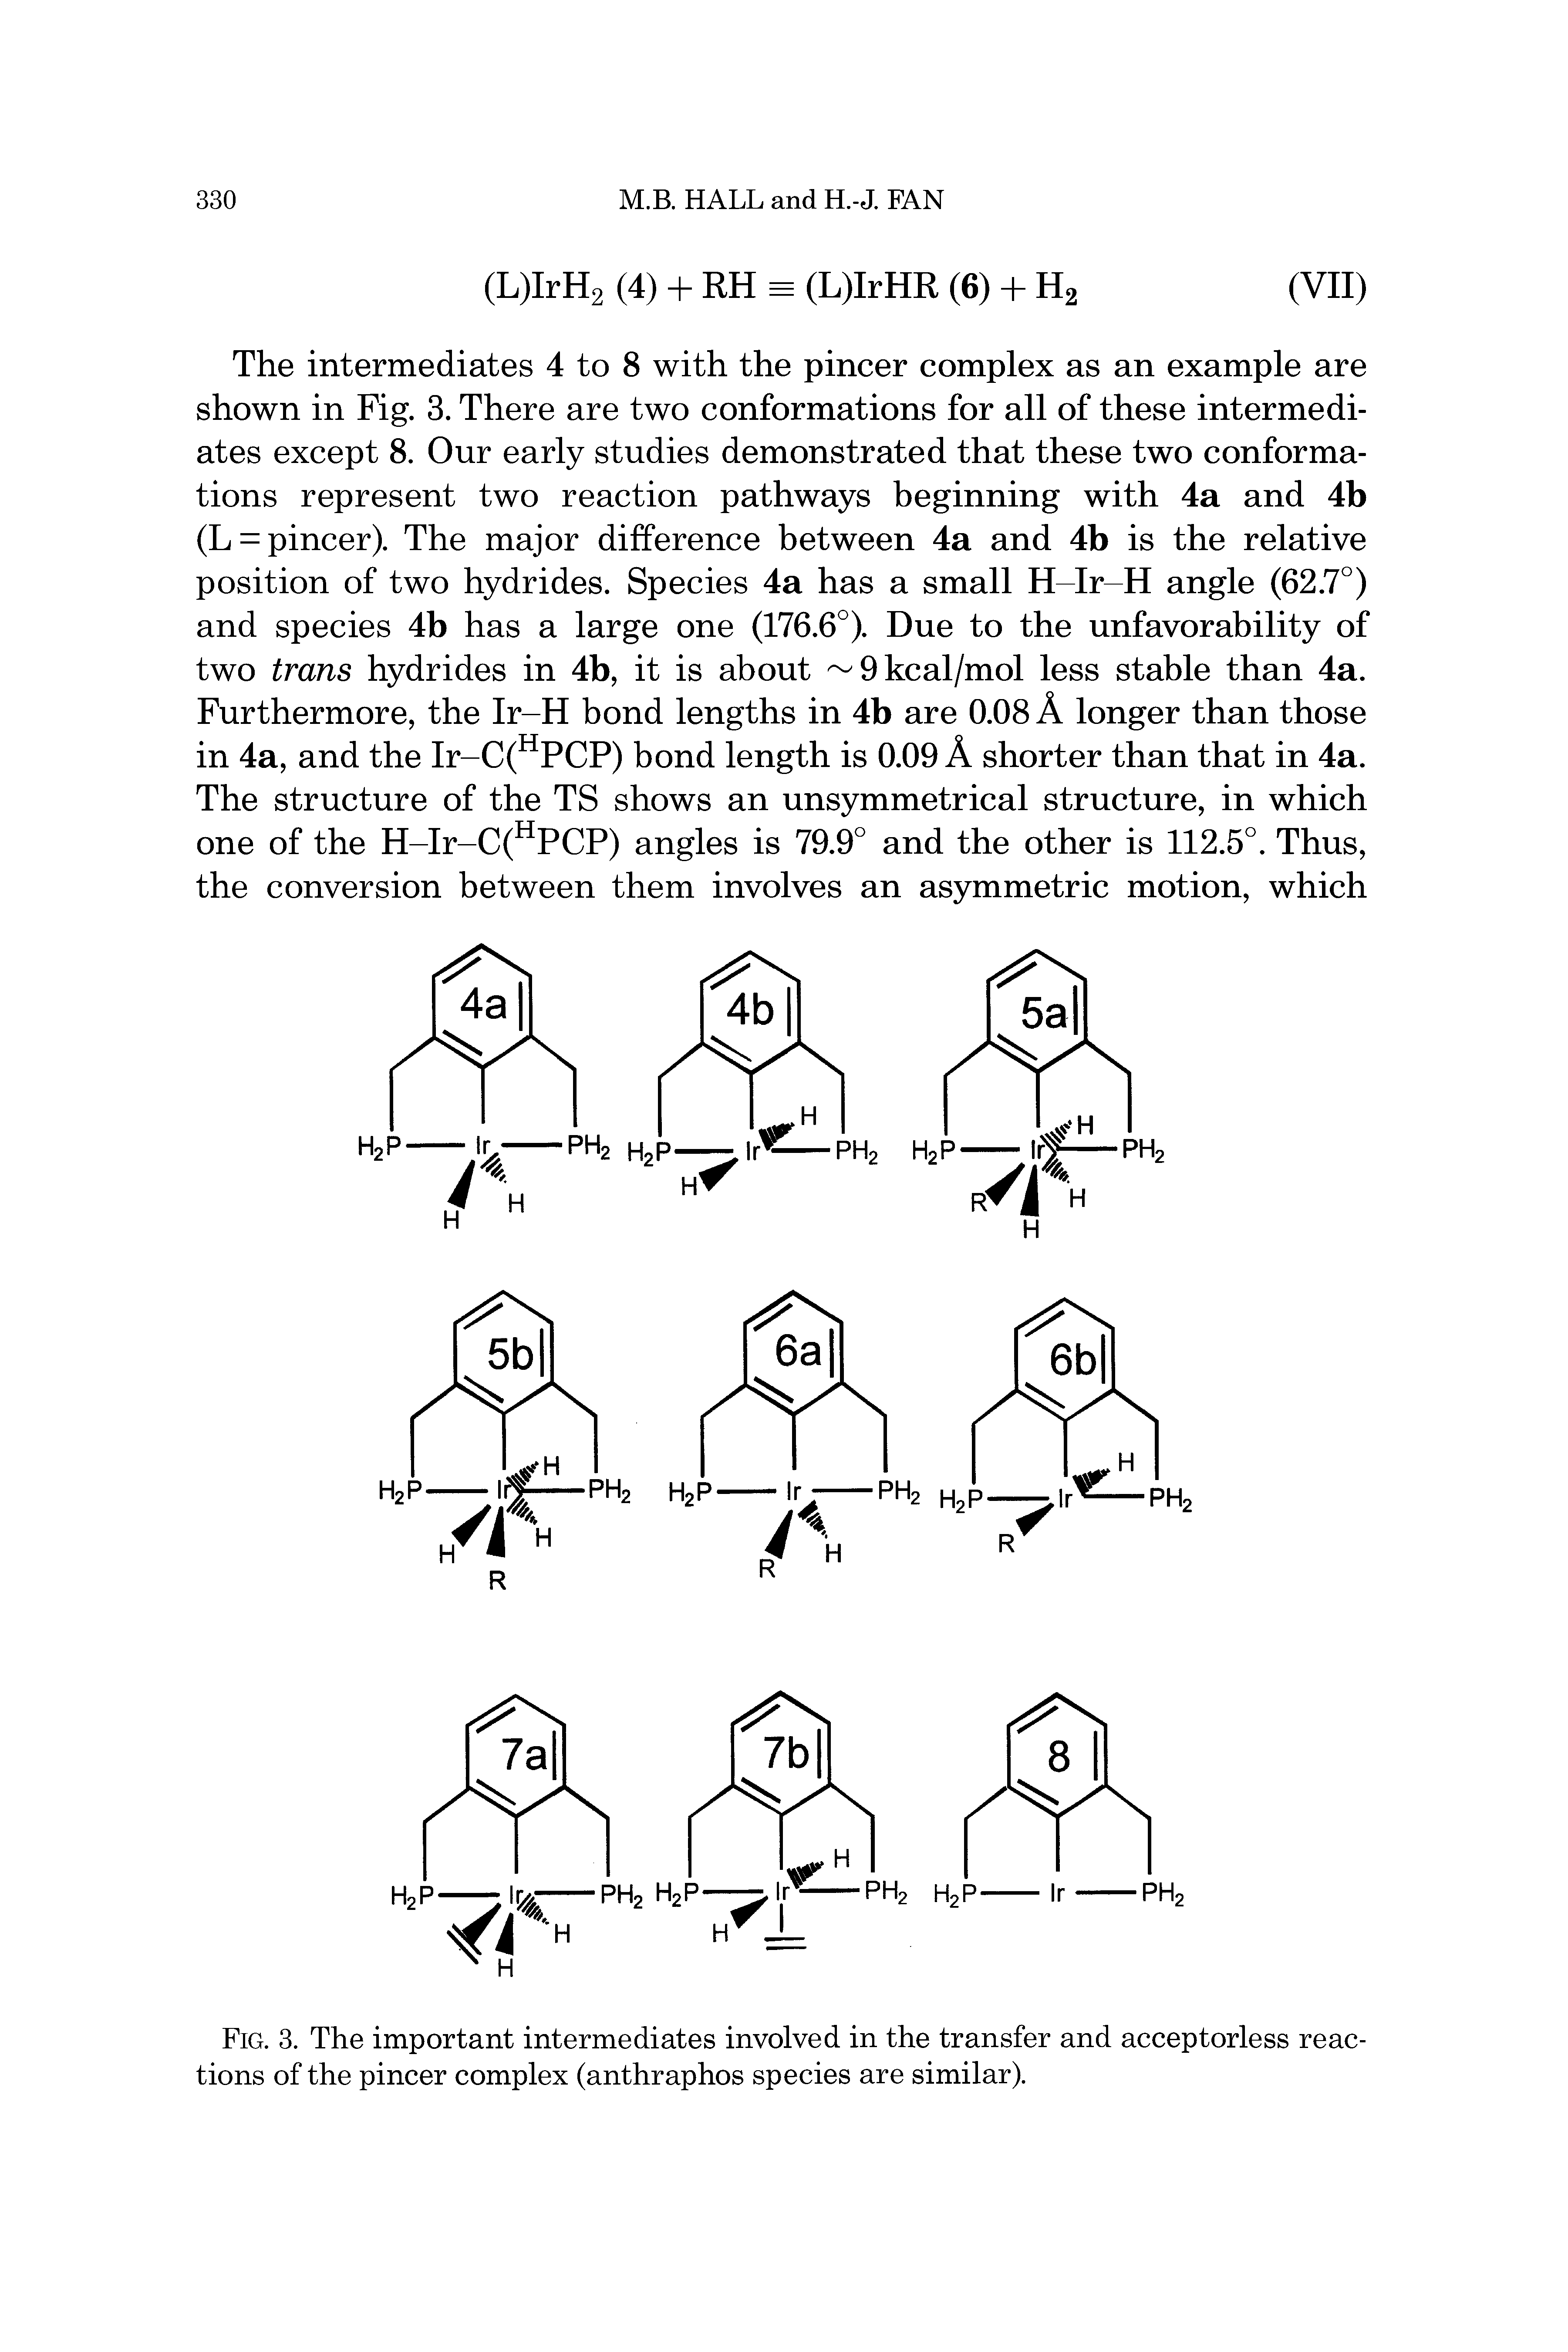 Fig. 3. The important intermediates involved in the transfer and acceptorless reactions of the pincer complex (anthraphos species are similar).